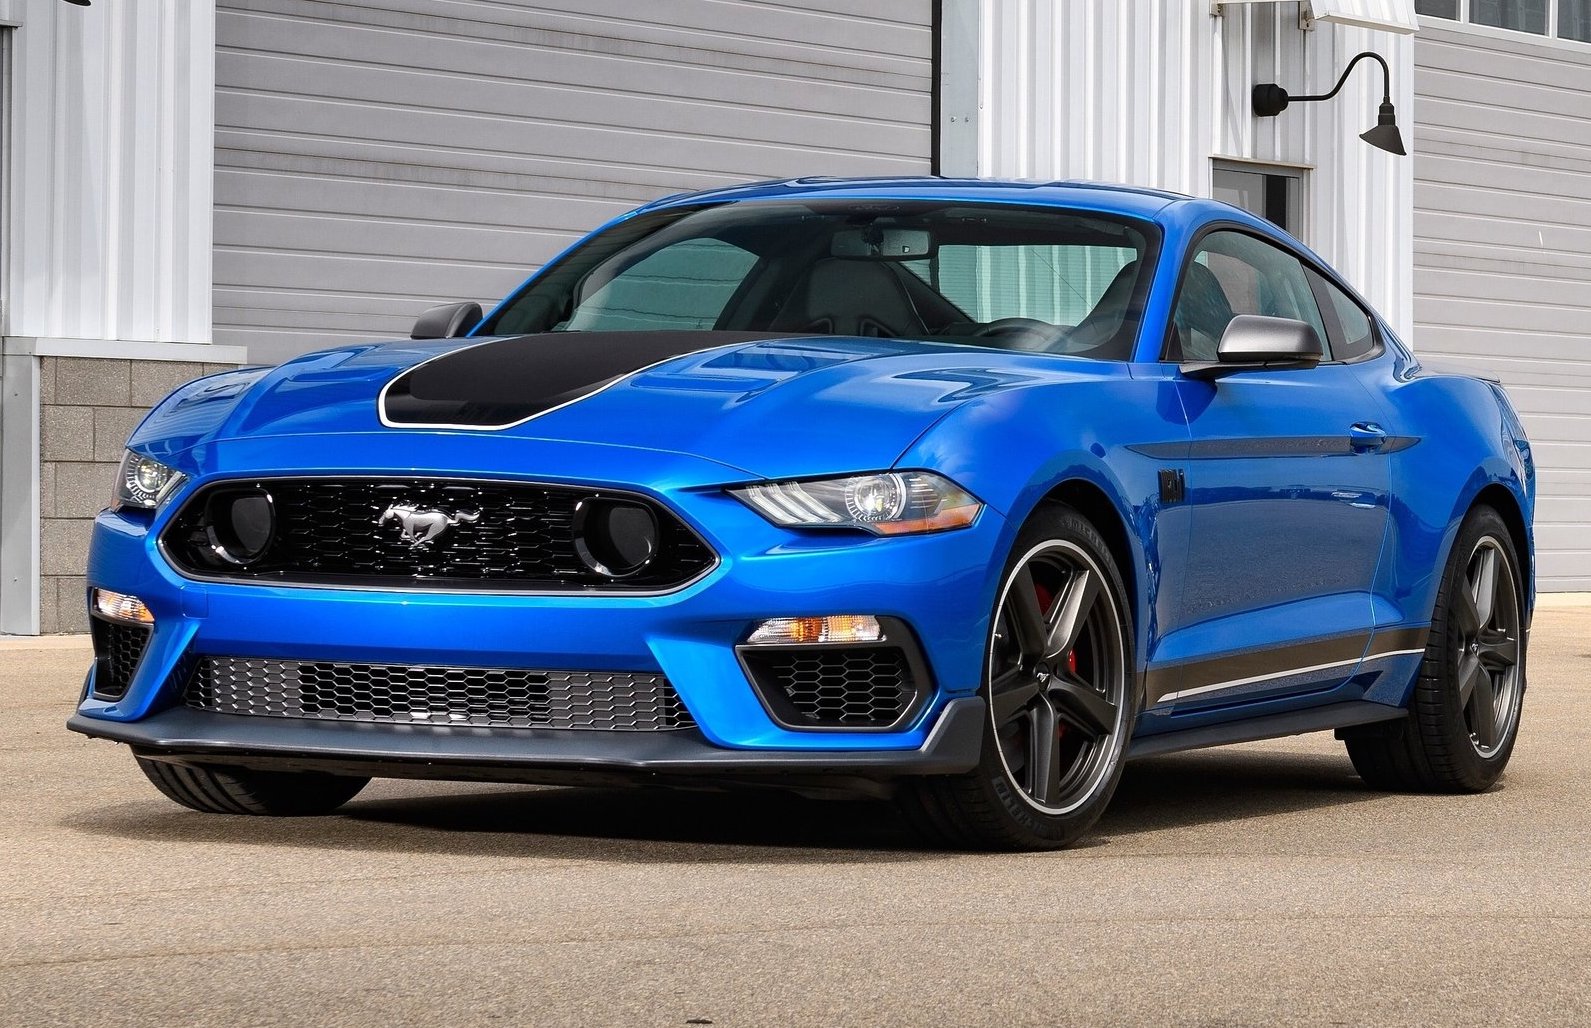 2021 Ford Mustang Mach 1 Images Specs, Redesigns, Price - Specs ...